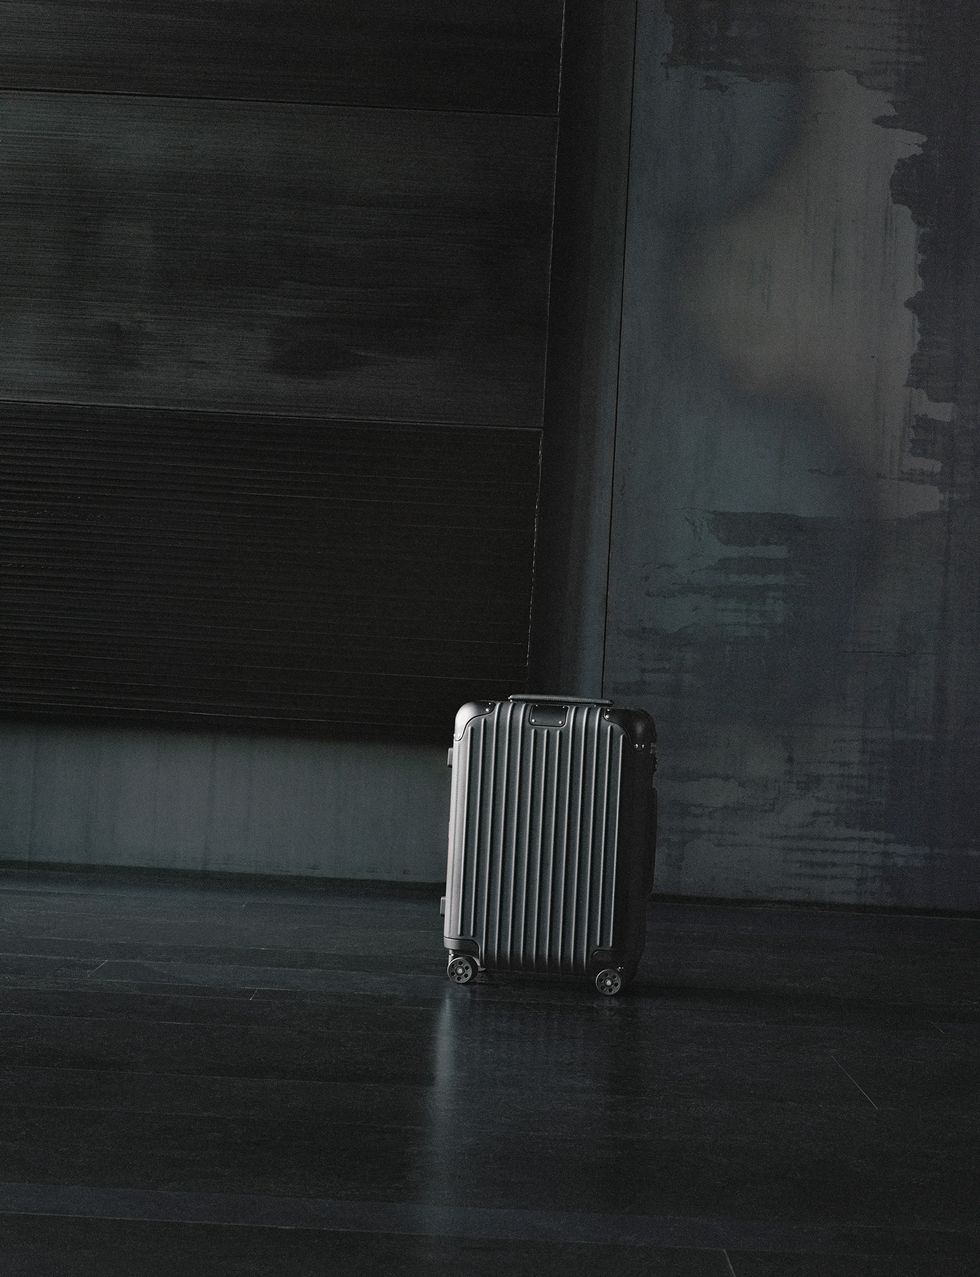 a suitcase in a dark room